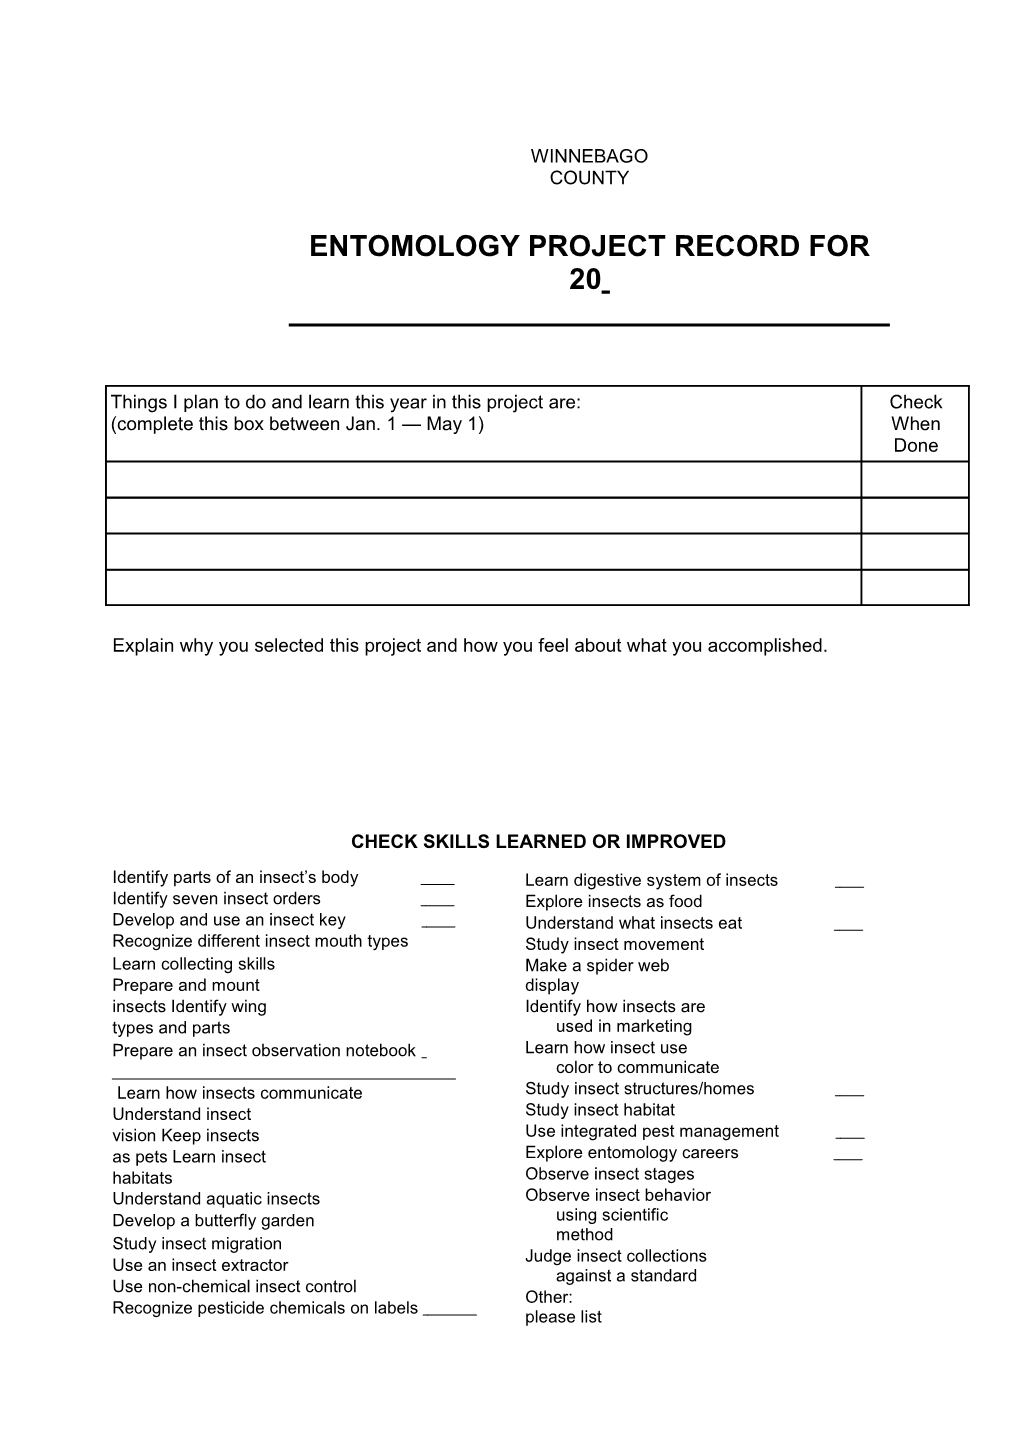 Entomology Project Record for 20